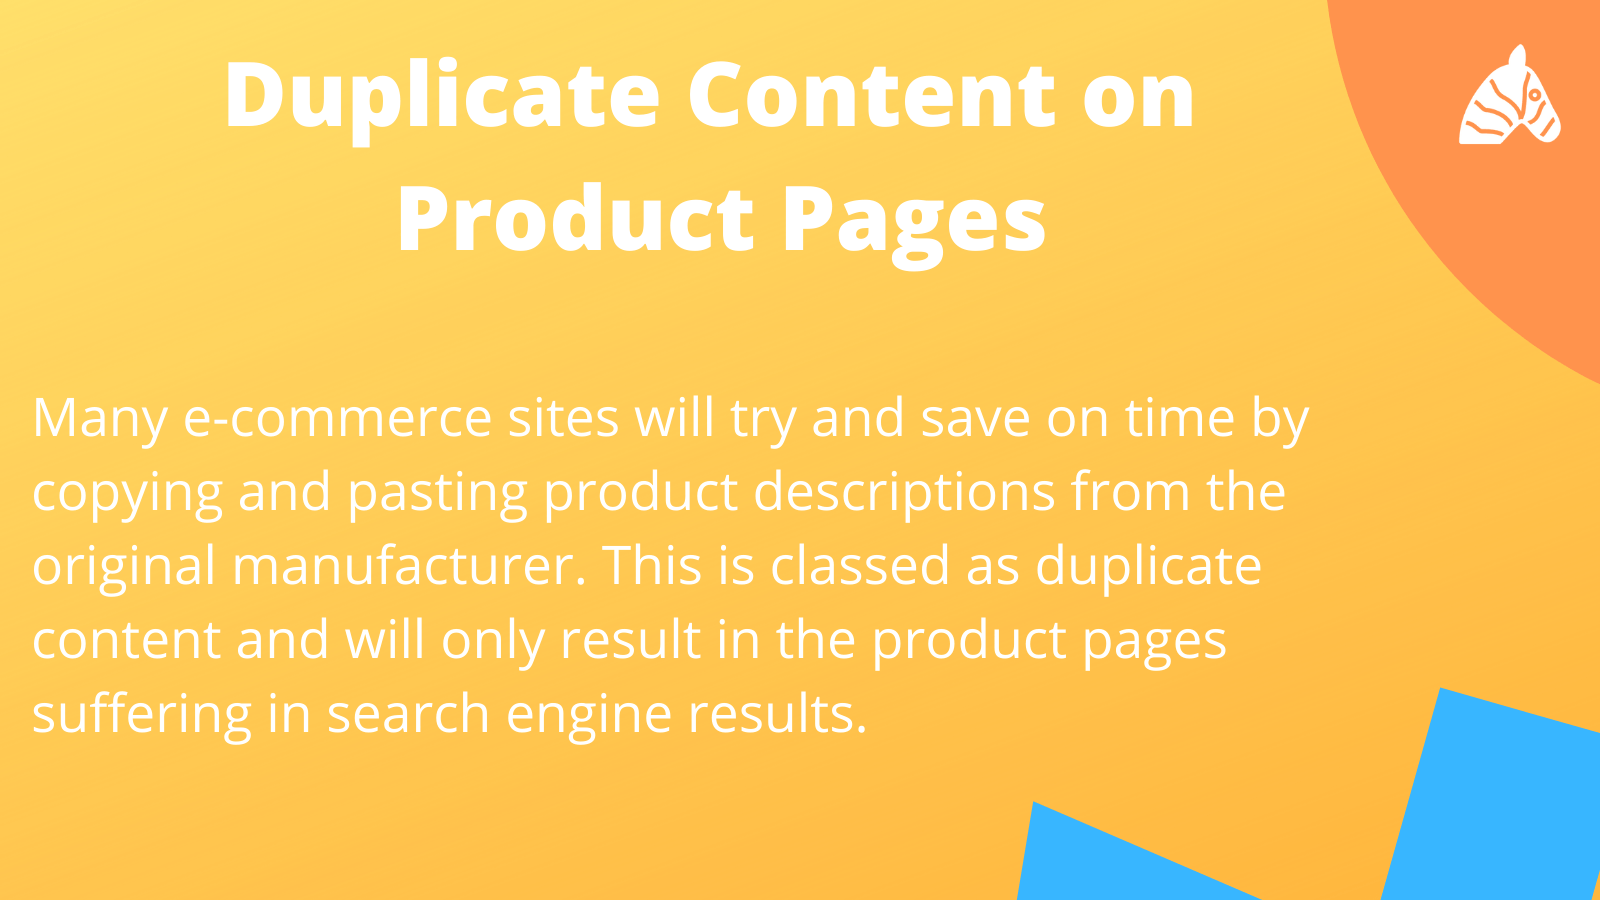 Handling duplicate content on product pages